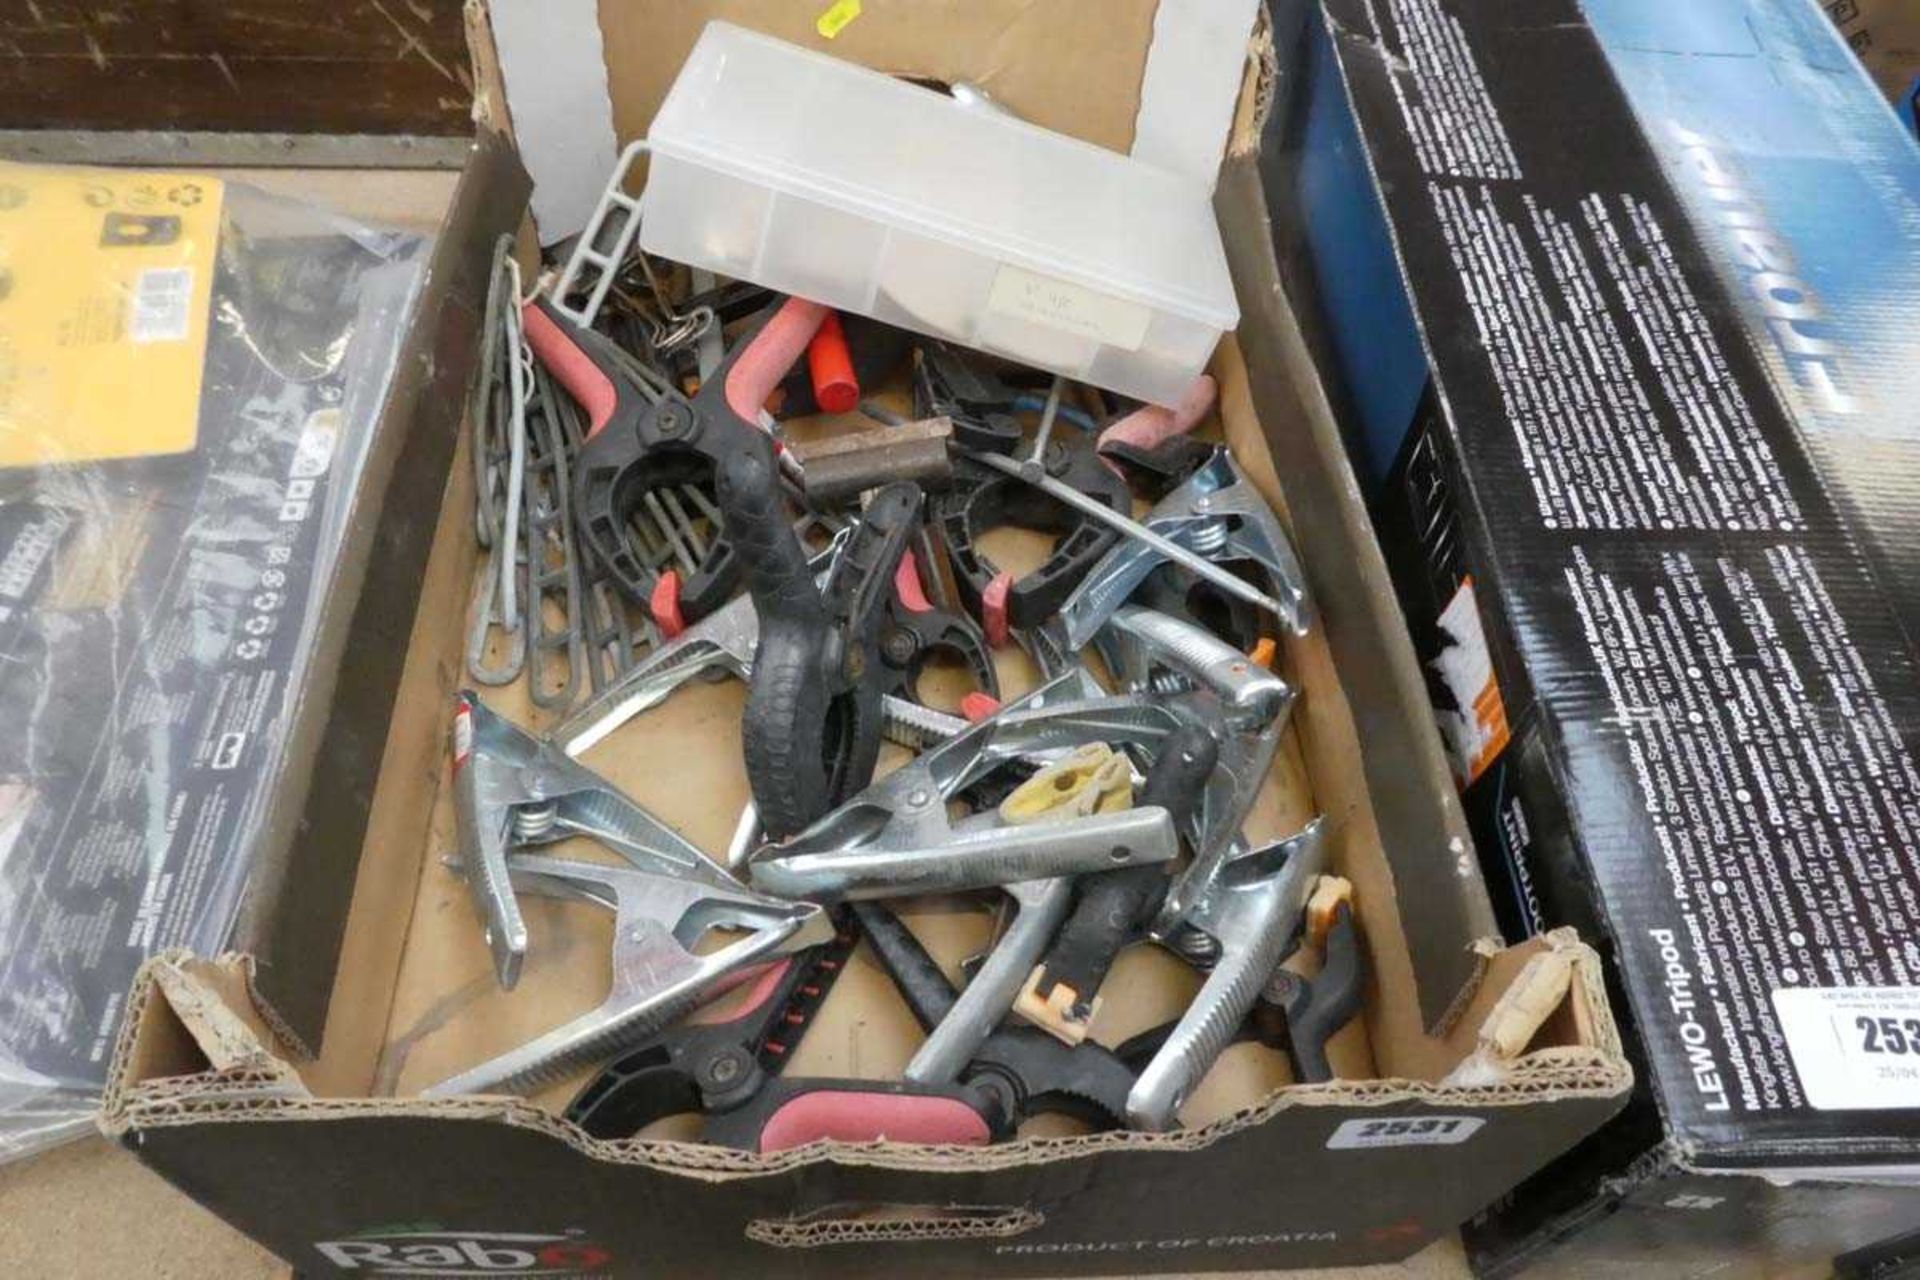 Crate containing qty of various bulldog style clips and clamps